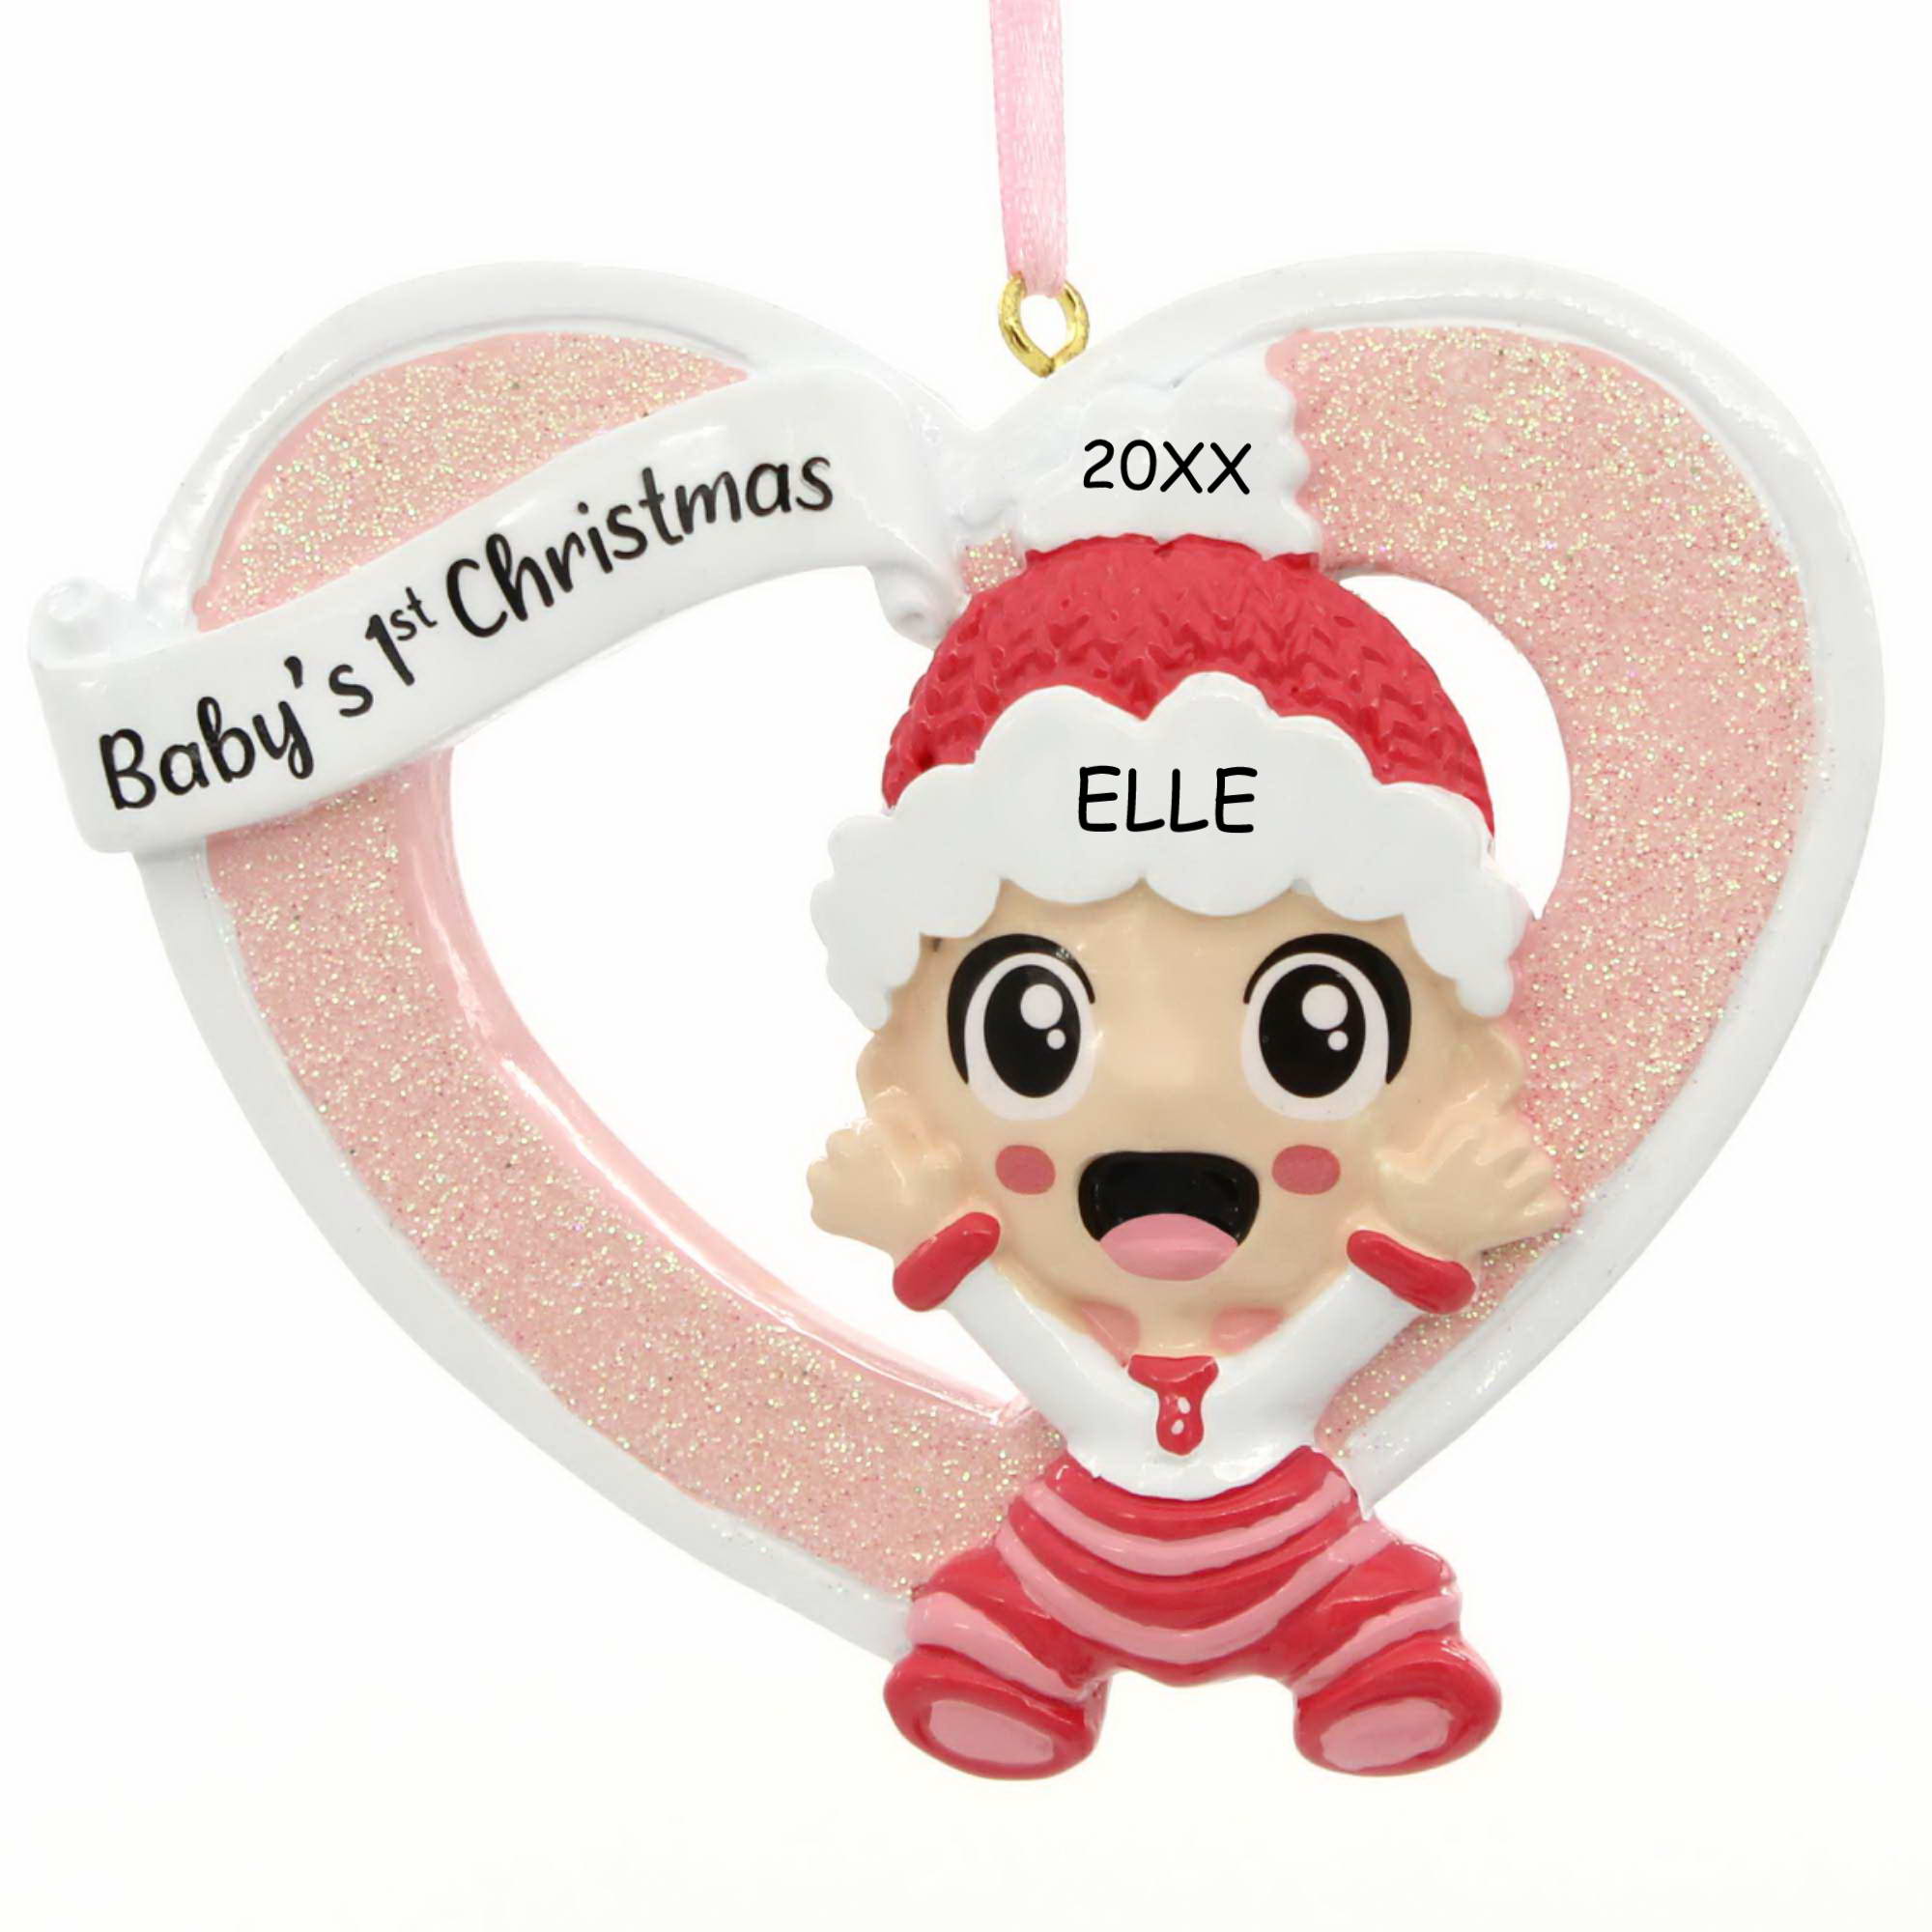 Personalized Dibsies Big Hugs and Kisses Baby's First Christmas Ornament - Girl